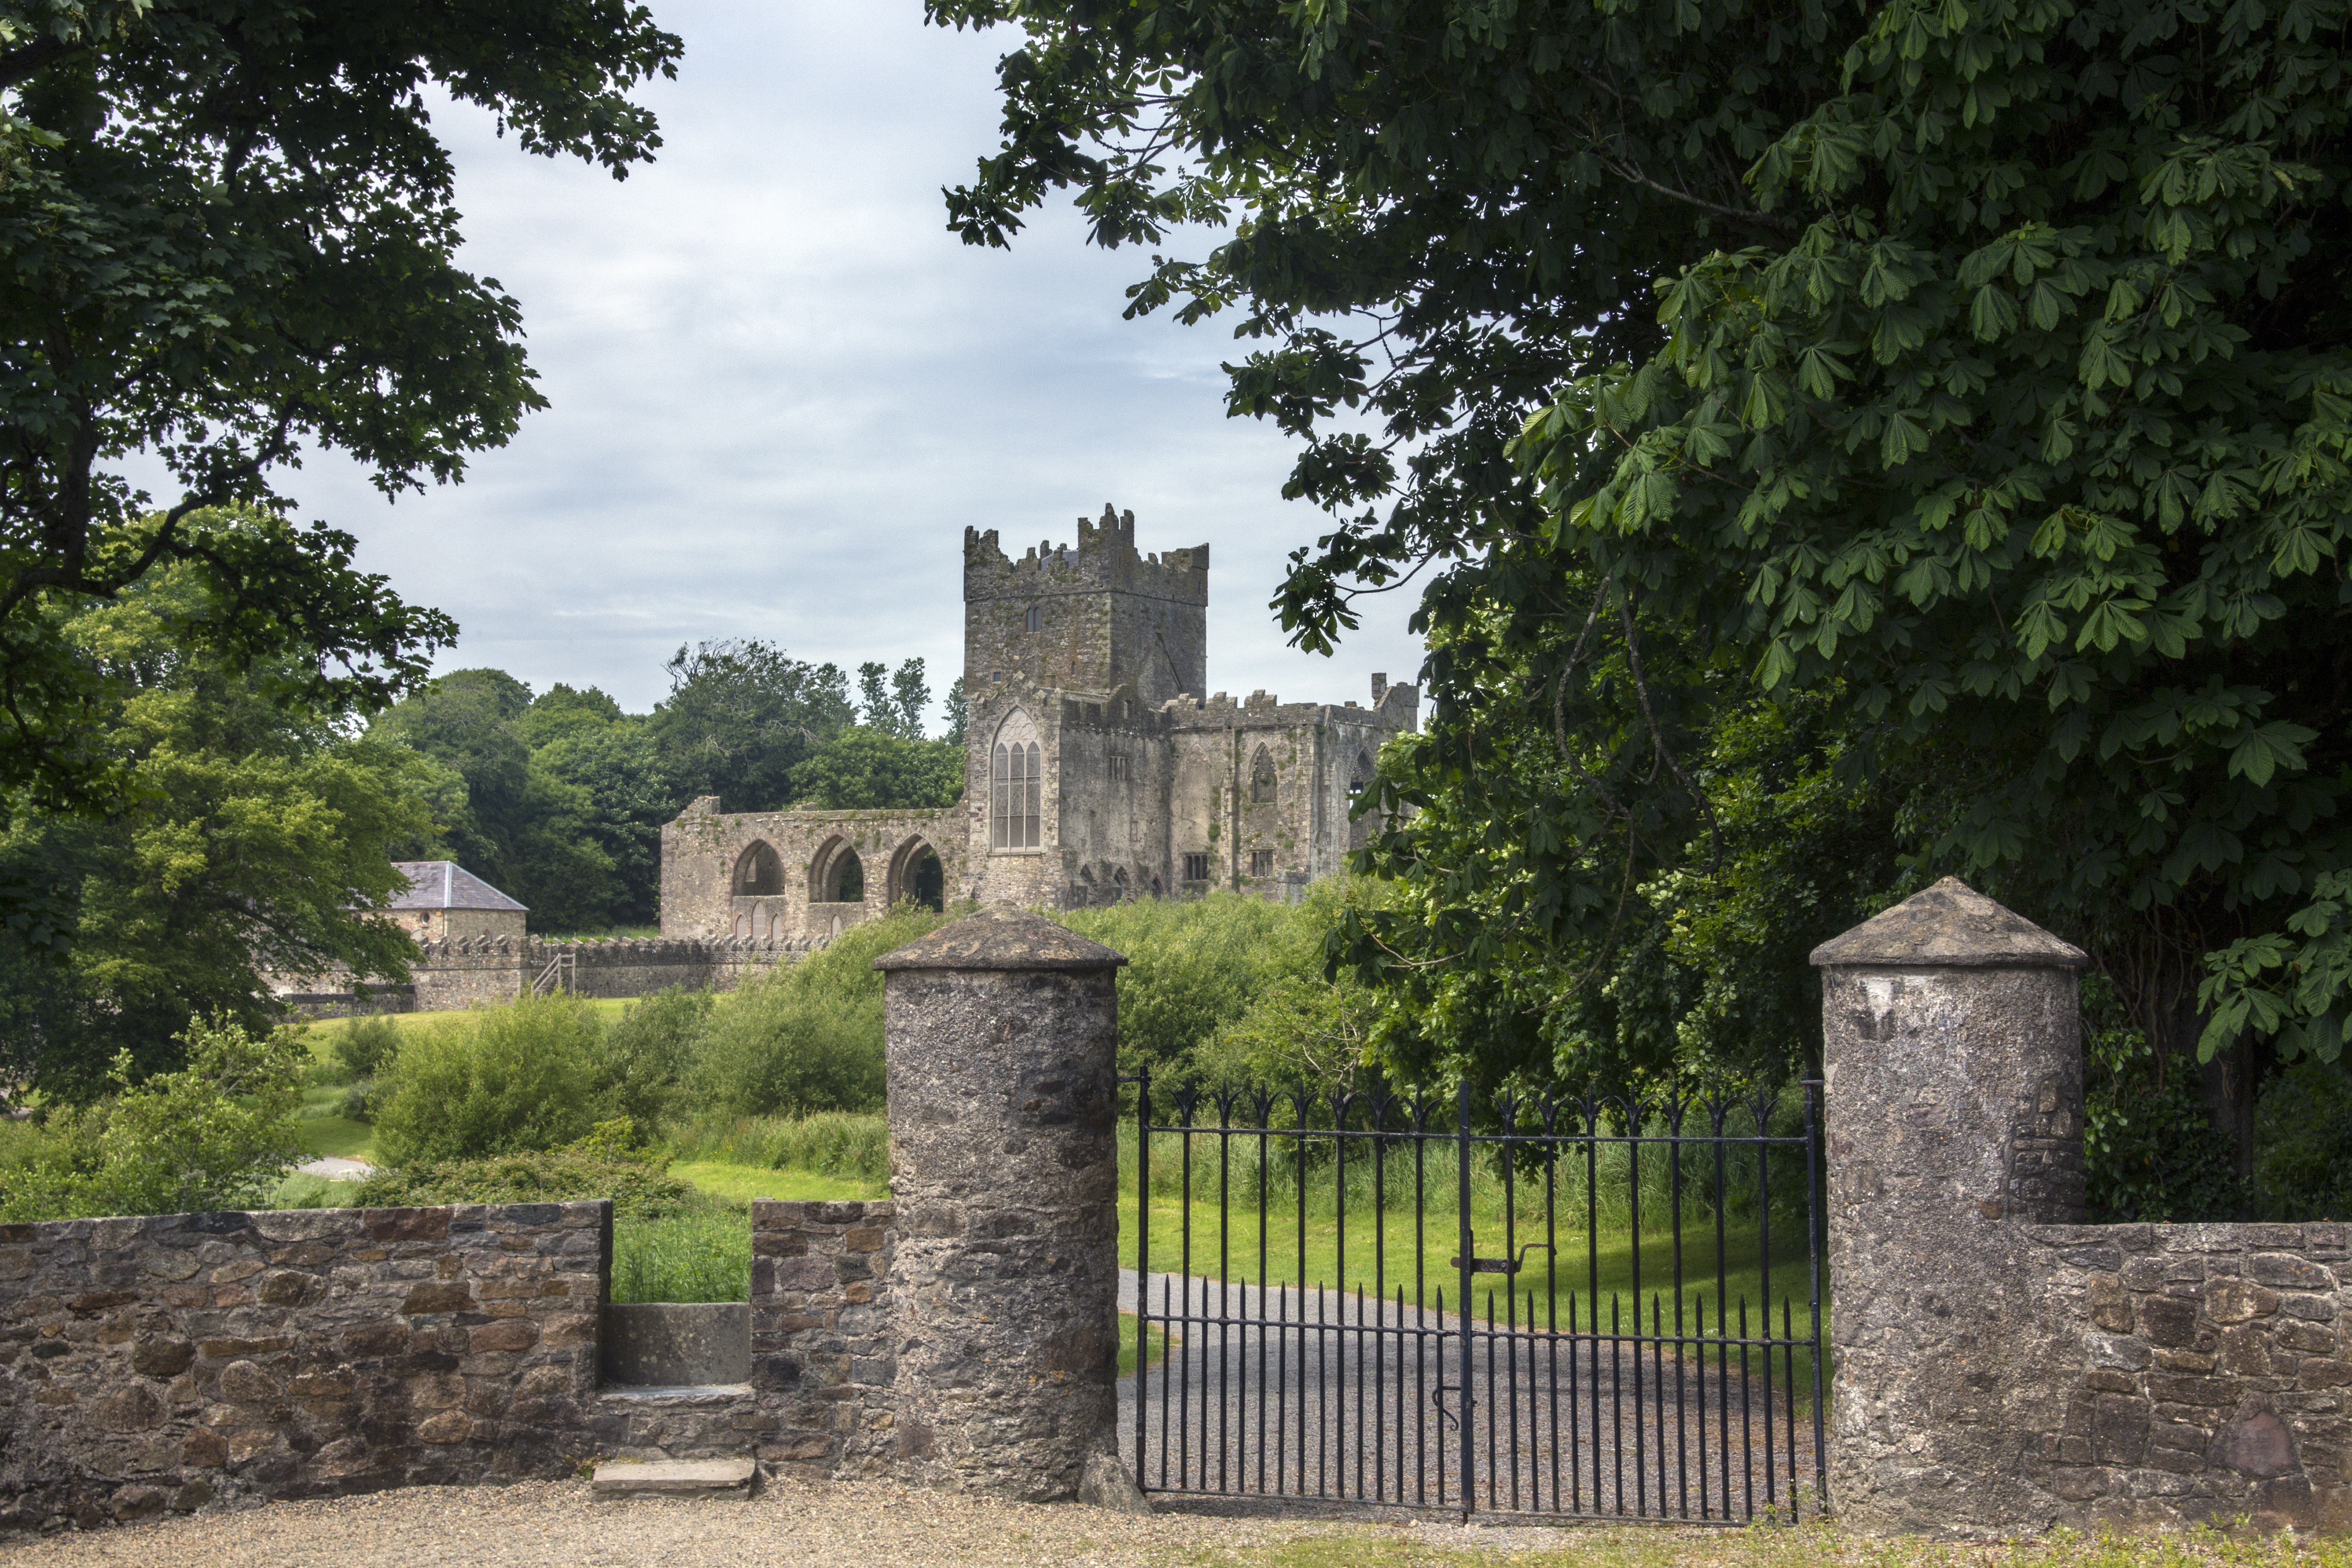 Tintern Abbey - the ruins of a Cistercian abbey located on the Hook peninsula